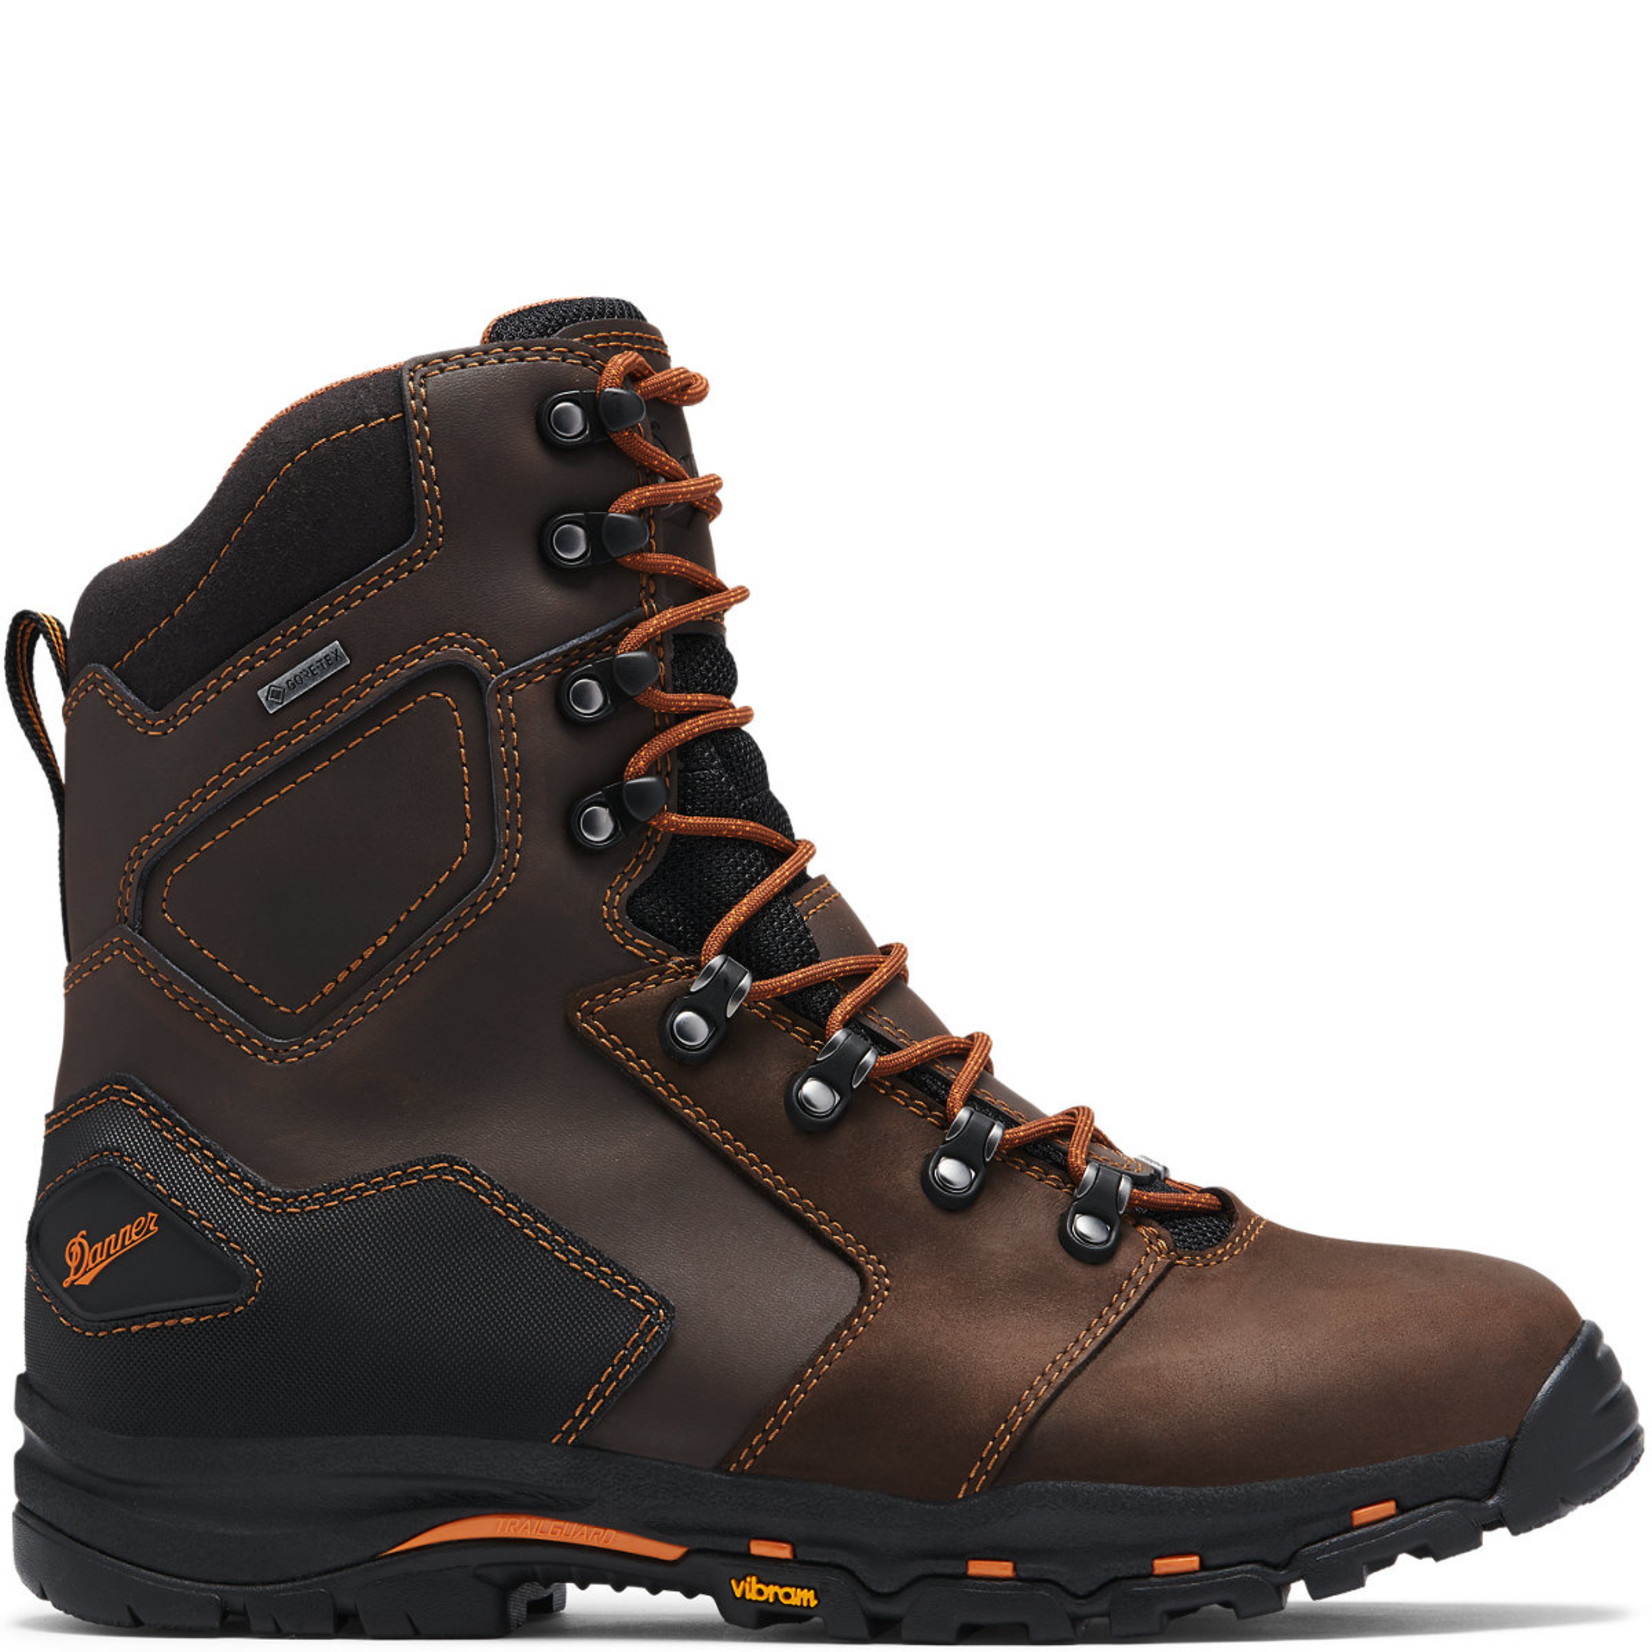 Danner Danner Vicious 8" 13868  Class 75/75 Men's NMT Safety Toe Boots